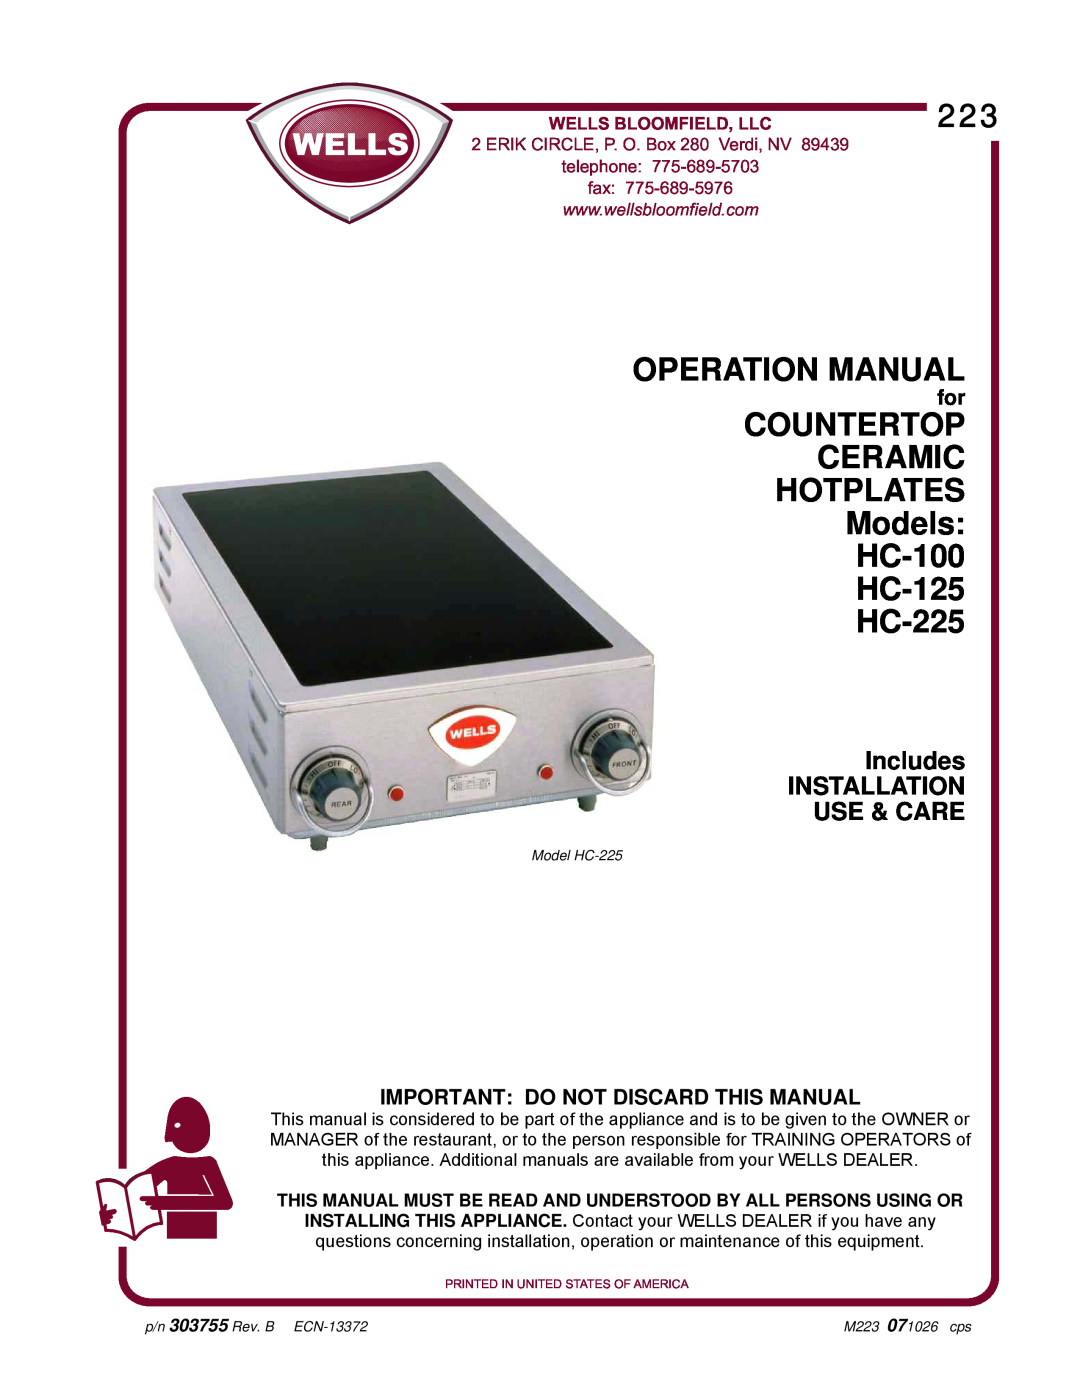 Wells operation manual COUNTERTOP CERAMIC HOTPLATES Models HC-100 HC-125 HC-225, Includes INSTALLATION USE & CARE 